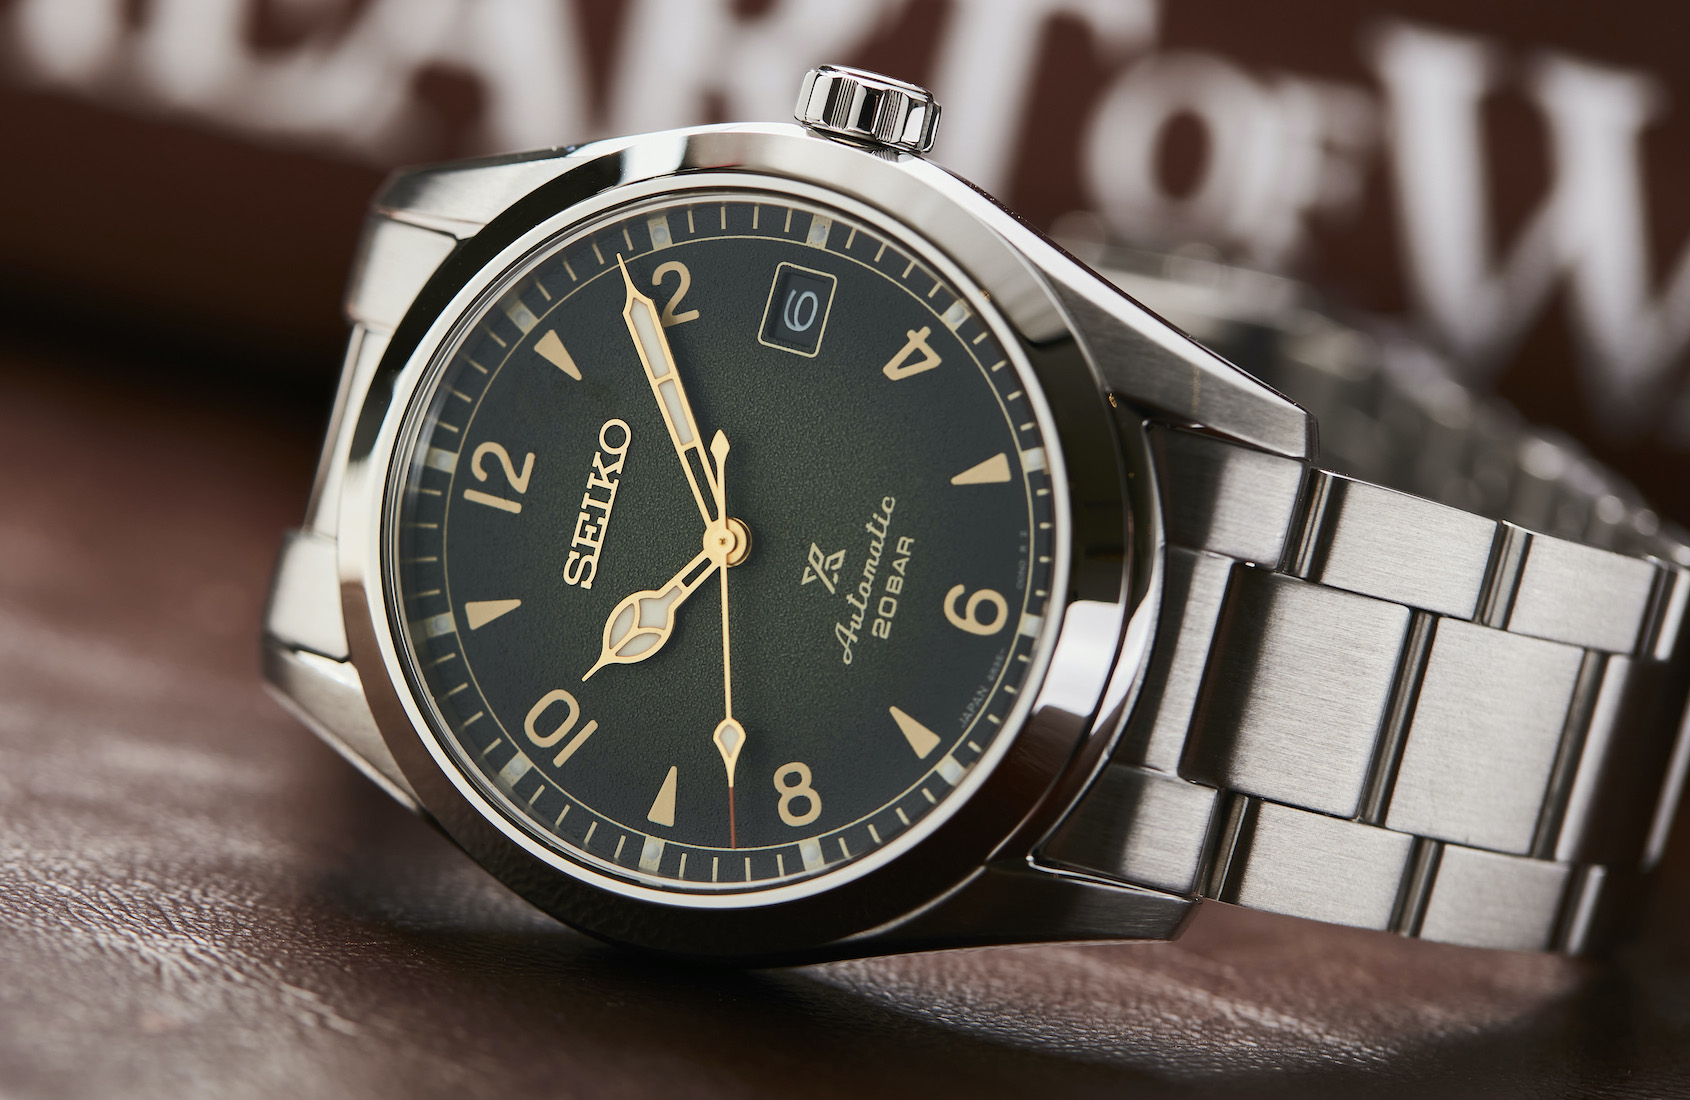 seiko alpinist 38mm review - Today's Deals - Up To 75% Off